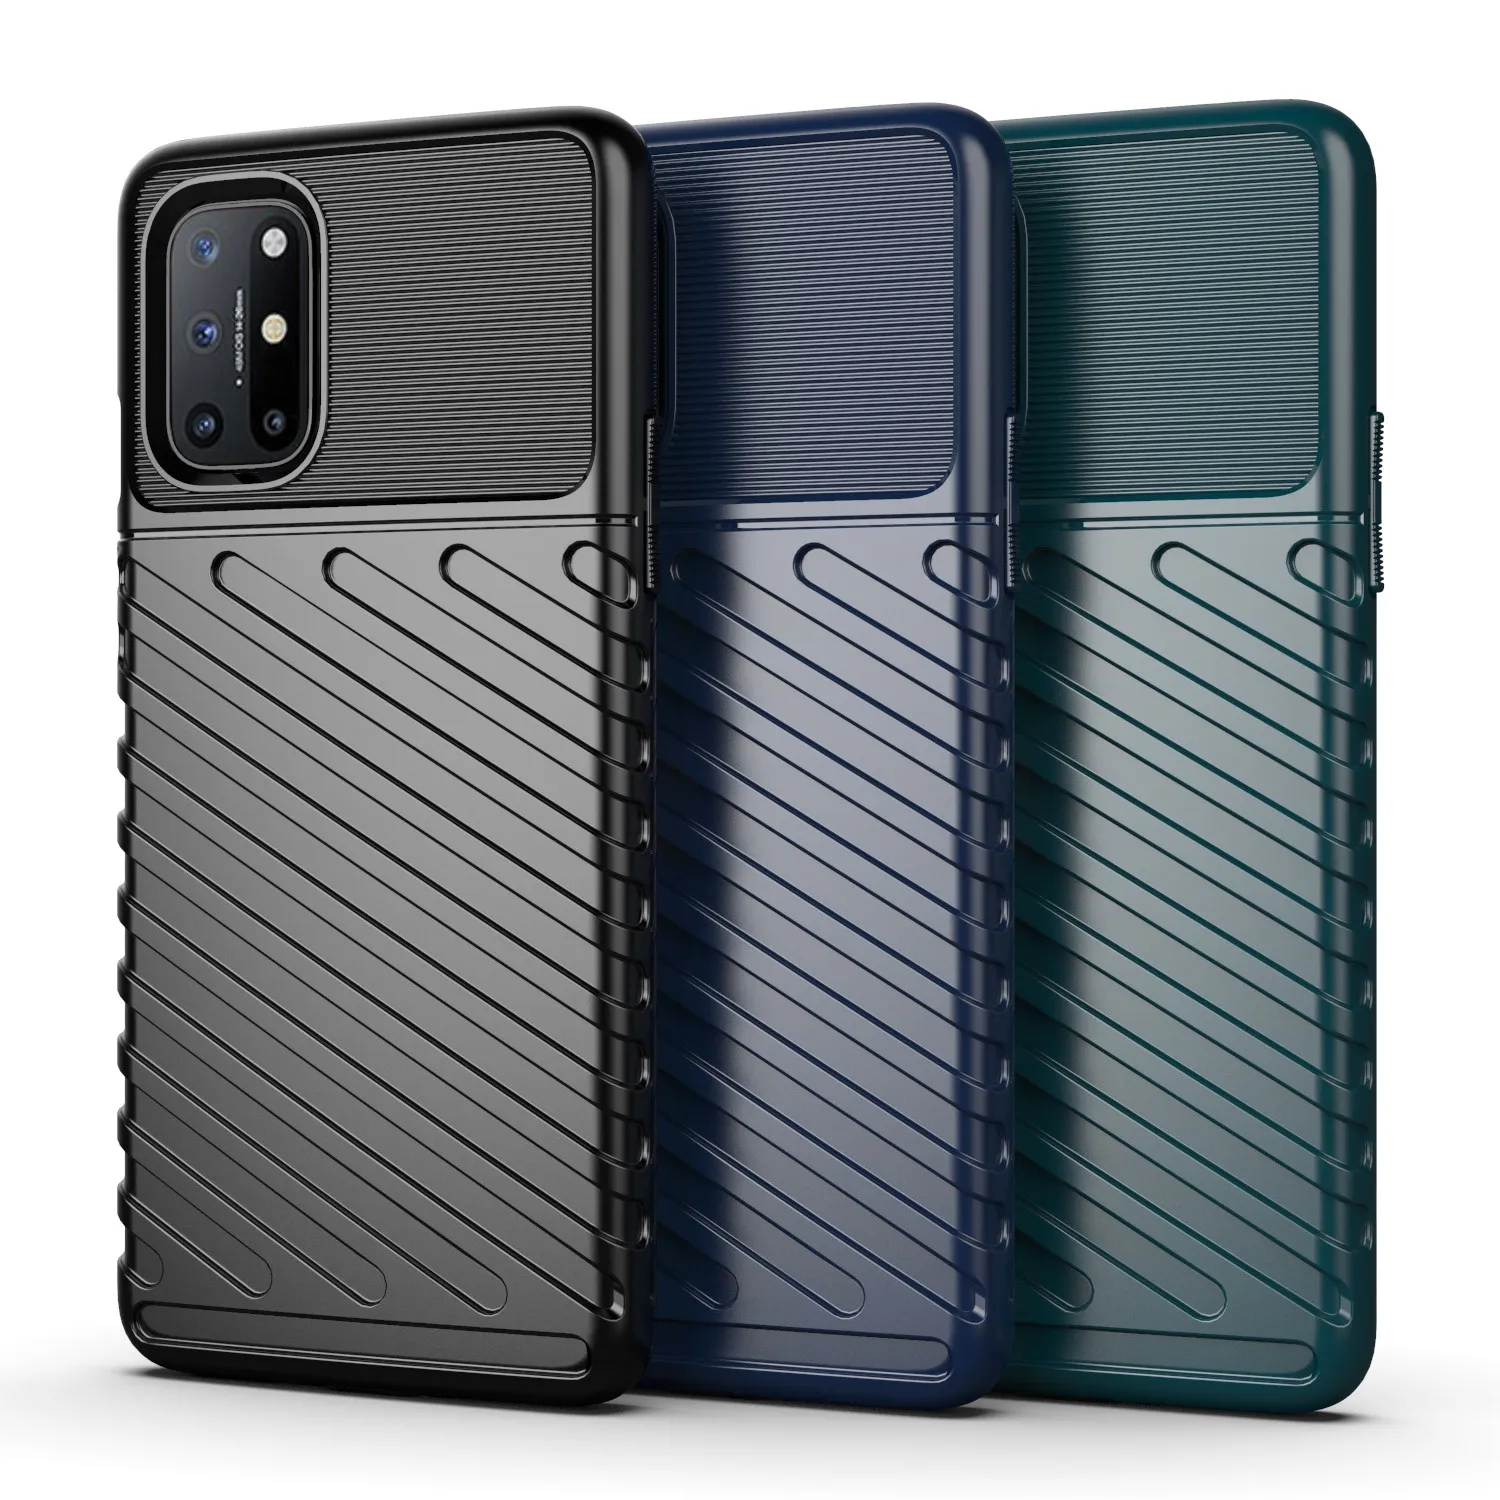 

For Cover Oneplus 8T Case For Oneplus 8T Capas Shockproof Armor Rubber Cover For Oneplus Nord One Plus Nord N100 N10 8T Fundas